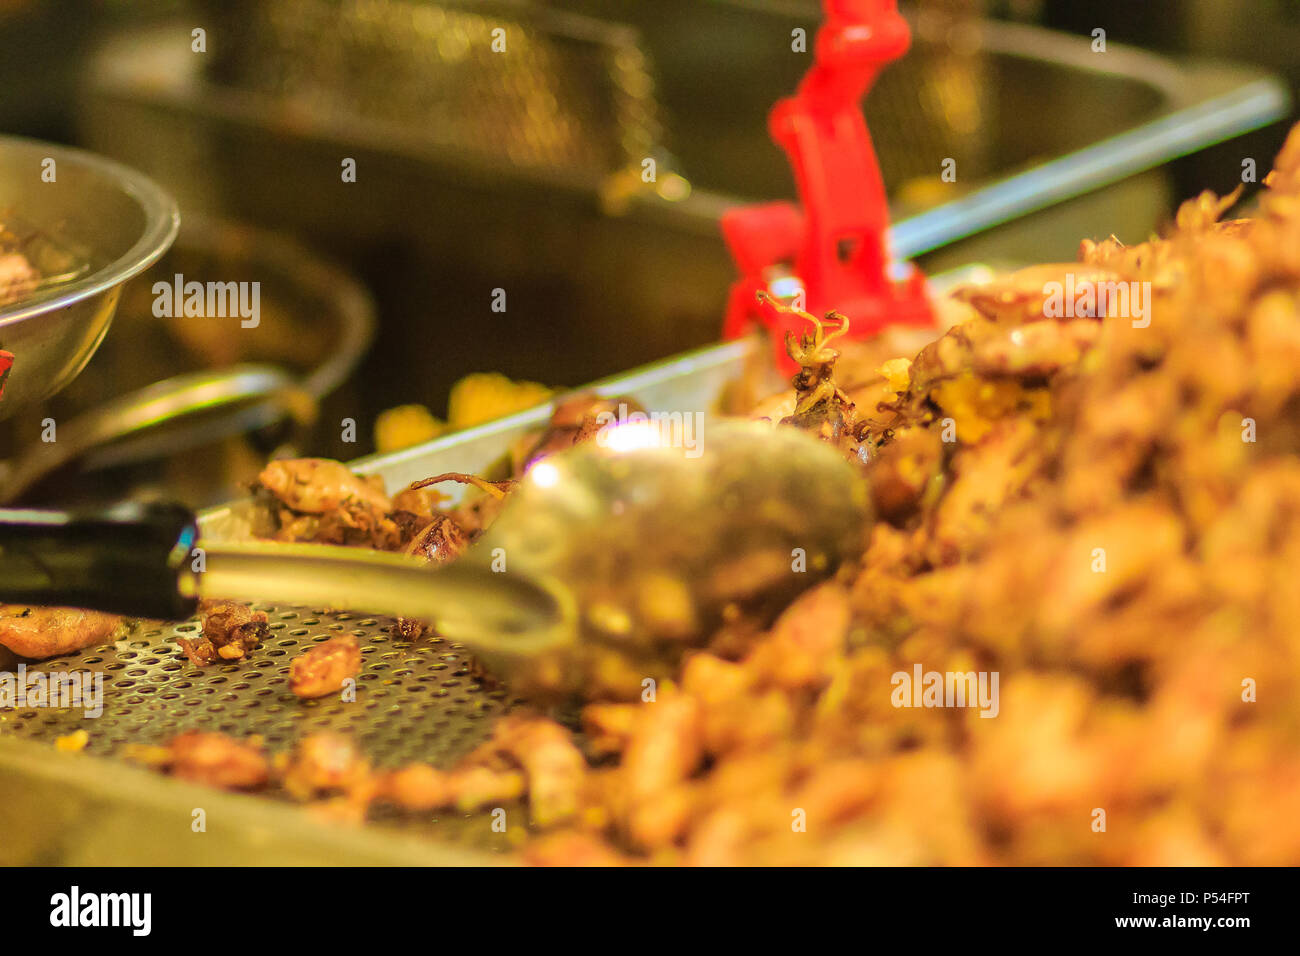 Vendor is selling fried baby squid with garlic in night market at Bangkok, Thailand. Stock Photo